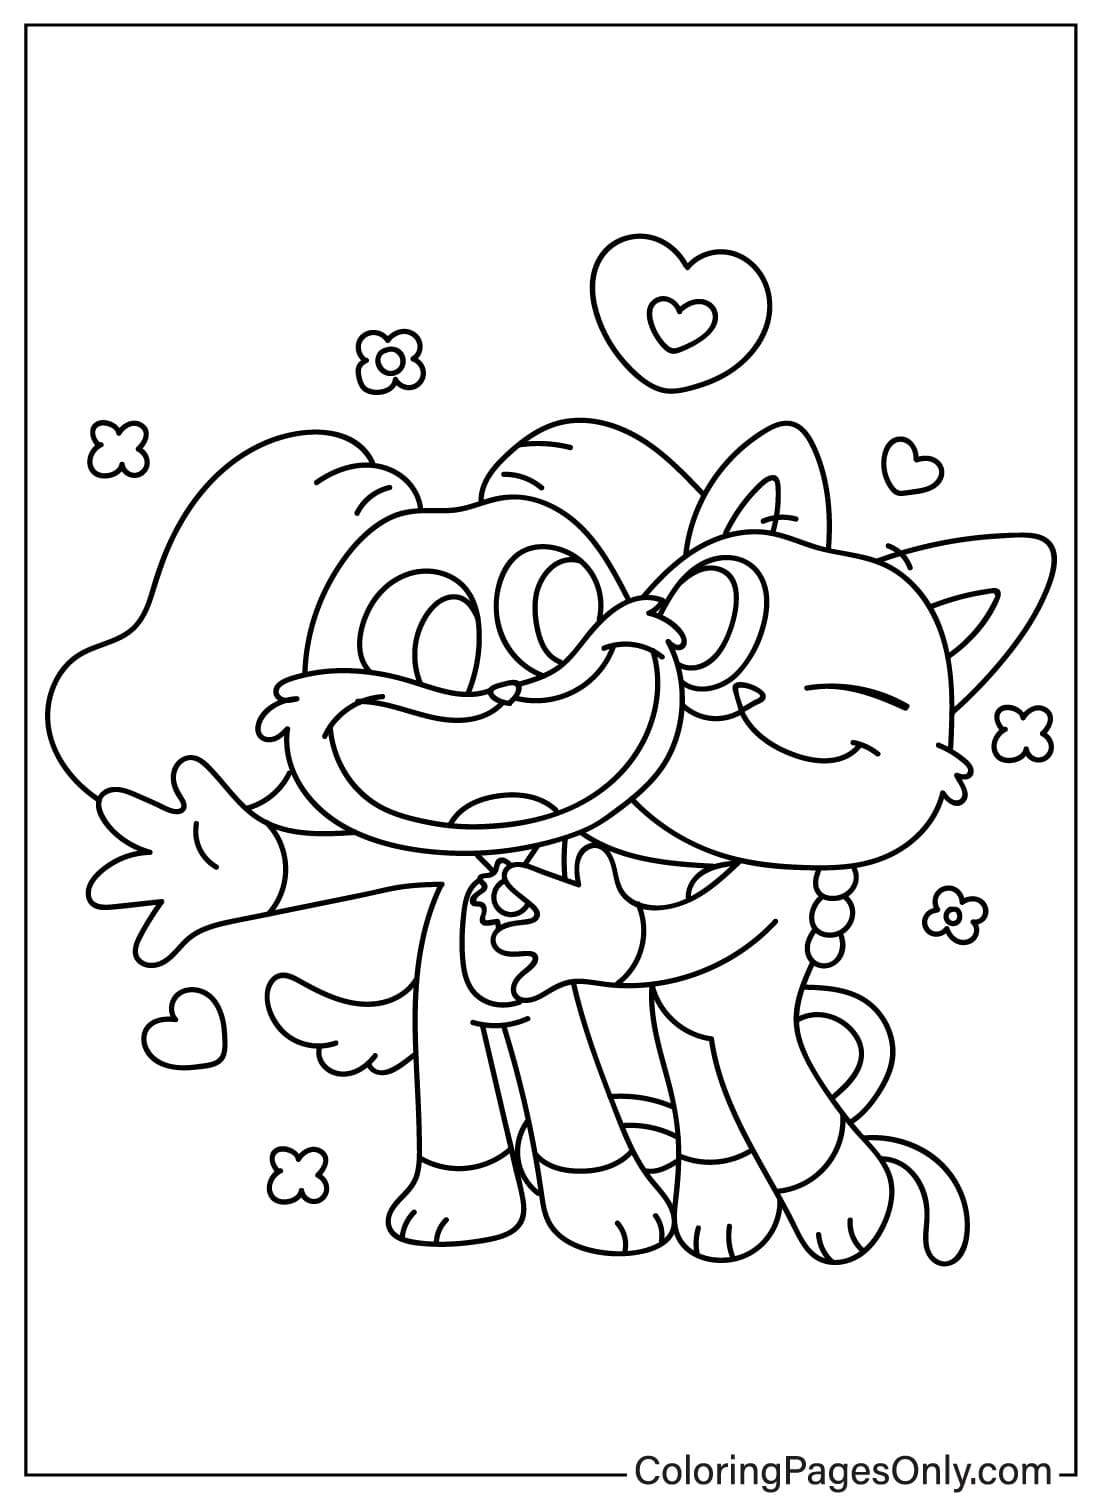 CatNap and DogDay Free Coloring Page from DogDay